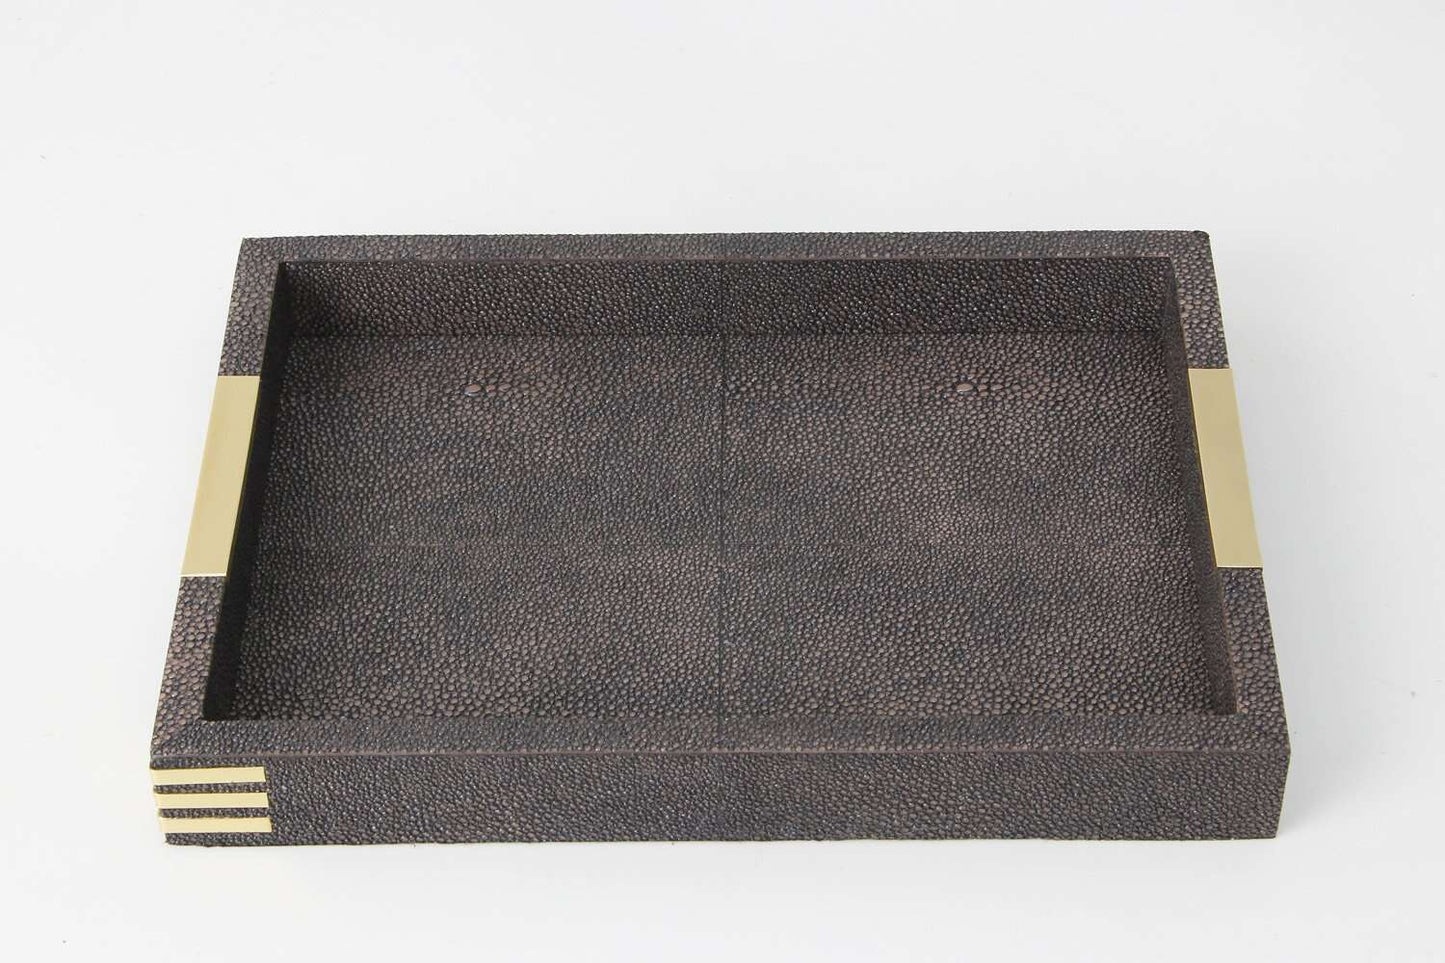 Holmes Desk Tray in Seal Brown Shagreen